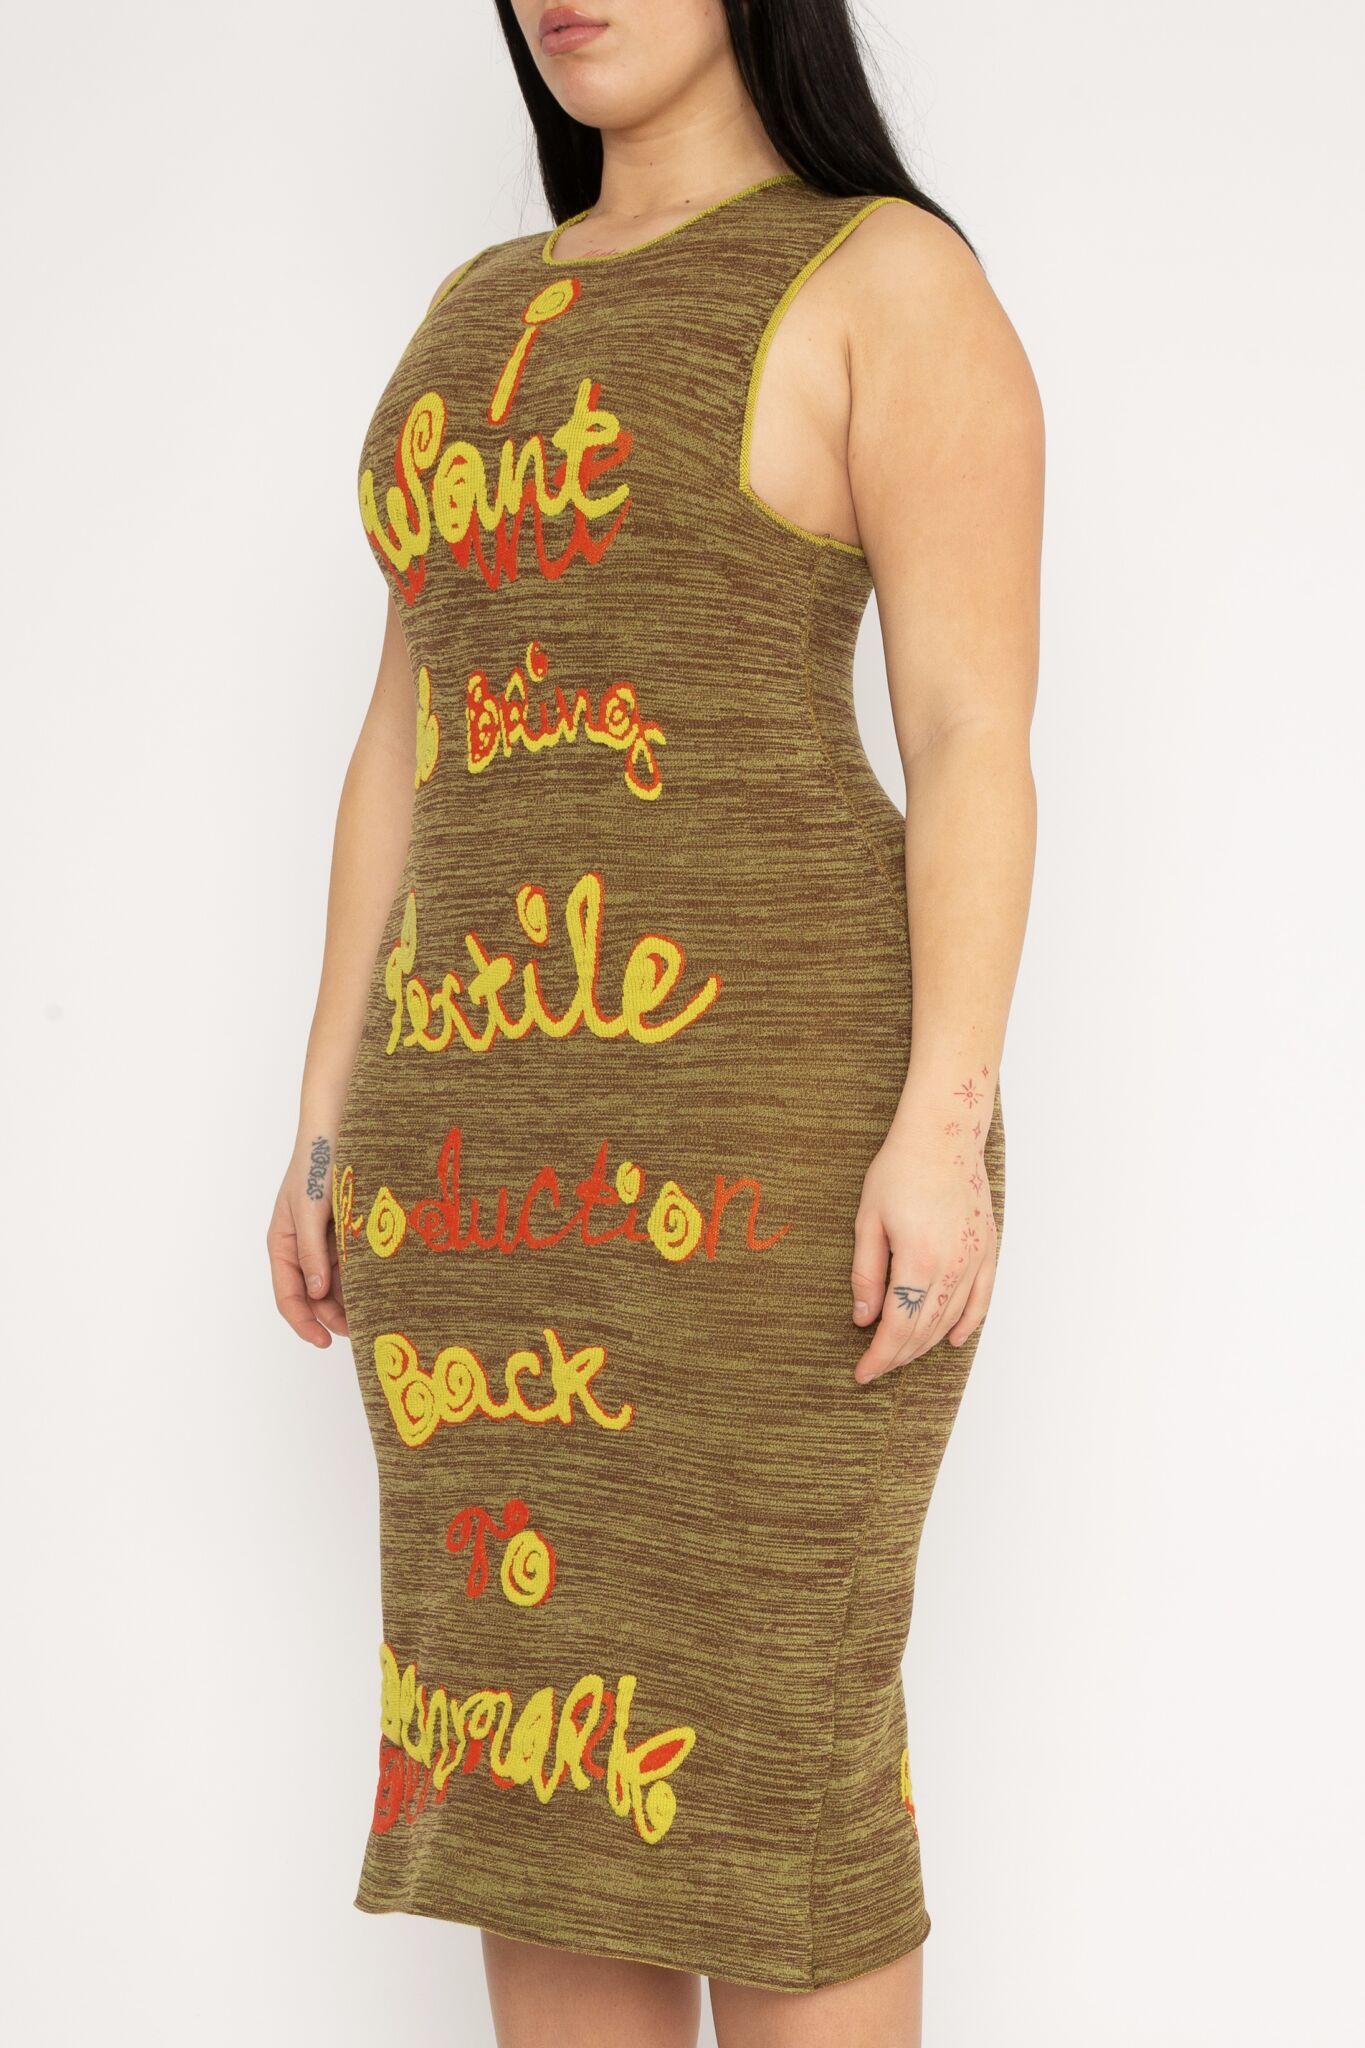 My Mission Dress in brown and yellow is a body fitted knitted jacquard dress in melange decorated with 3D statement artwork in bold colours. The dress is cut for a slim fit and has a slight shaping effect. A zipper has been added to make it easier to slide into. The merino wool makes the textile soft, and the nylon very flexible, meaning the dress adapts to the body wearing it. The My Mission Dress is a tribute to our core values and production methods, with the text in the front stating ”I want to bring textile production back to Denmark” and the back ”I simply don’t believe in mass production”. Available in 3 different colours and sizes.